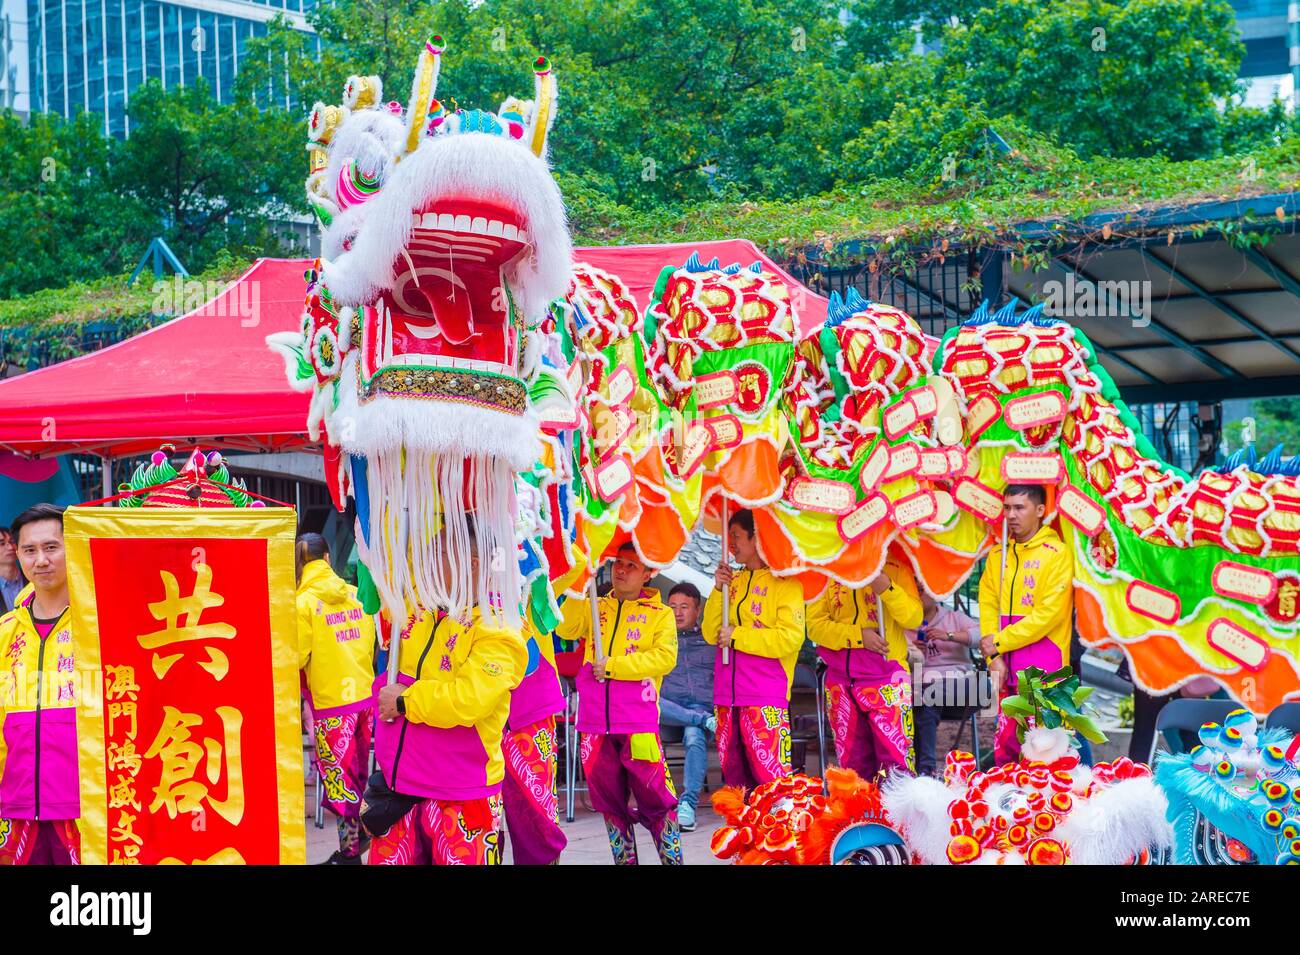 Dancers are waiting for a performance during the Macau International Dragon and Lion Dance Day event at Praca da Amizade in Macau Stock Photo